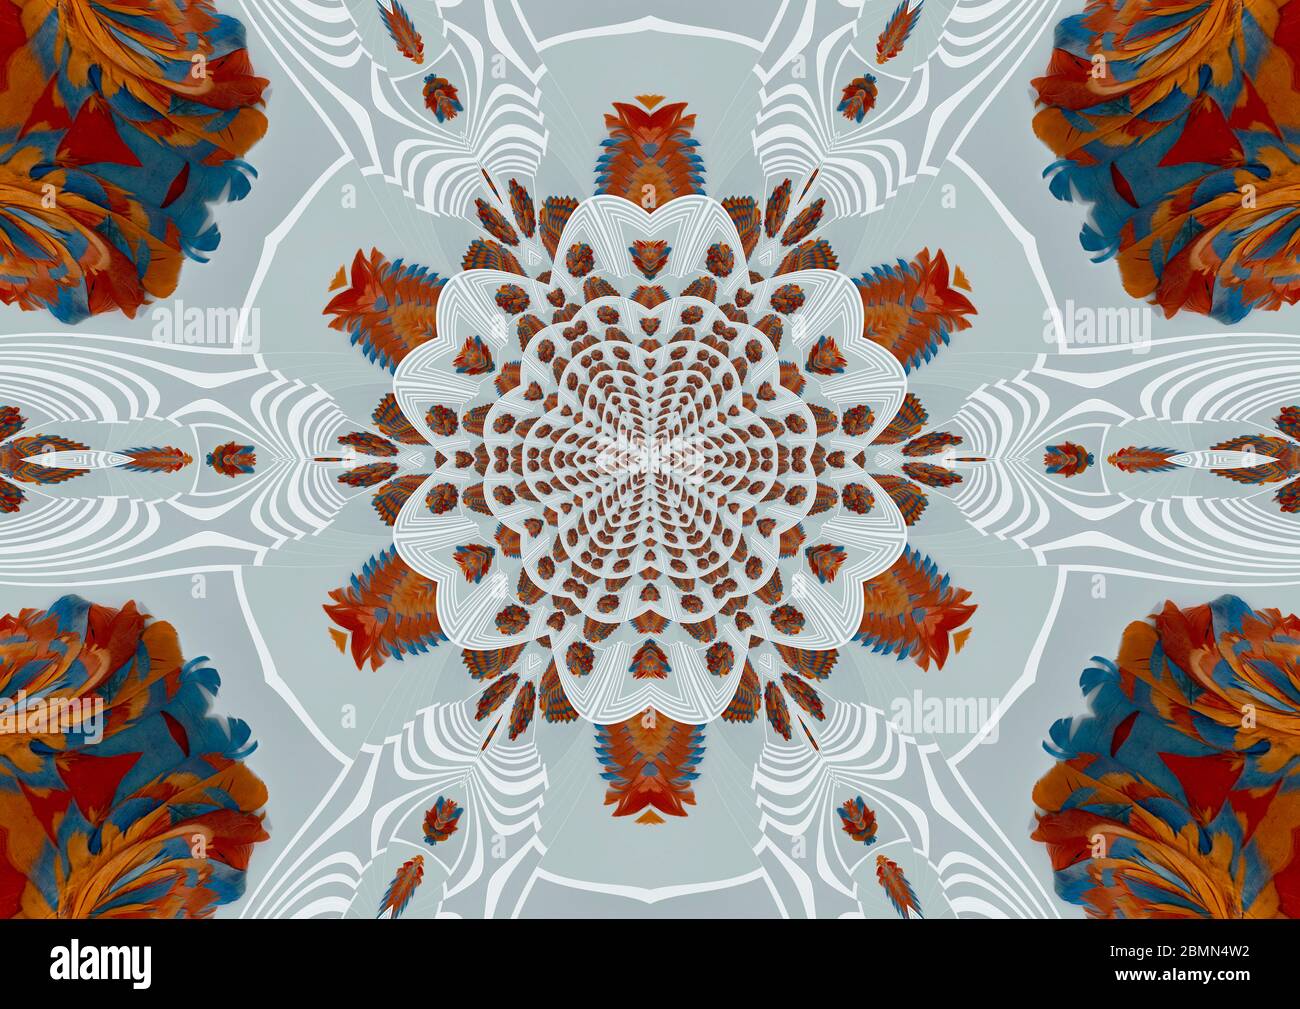 These lovely Mandalas were inspired by a work in the Rijksmuseum called a Cockade of feathers in the colours orange and blue in the form of a rosette. Stock Photo